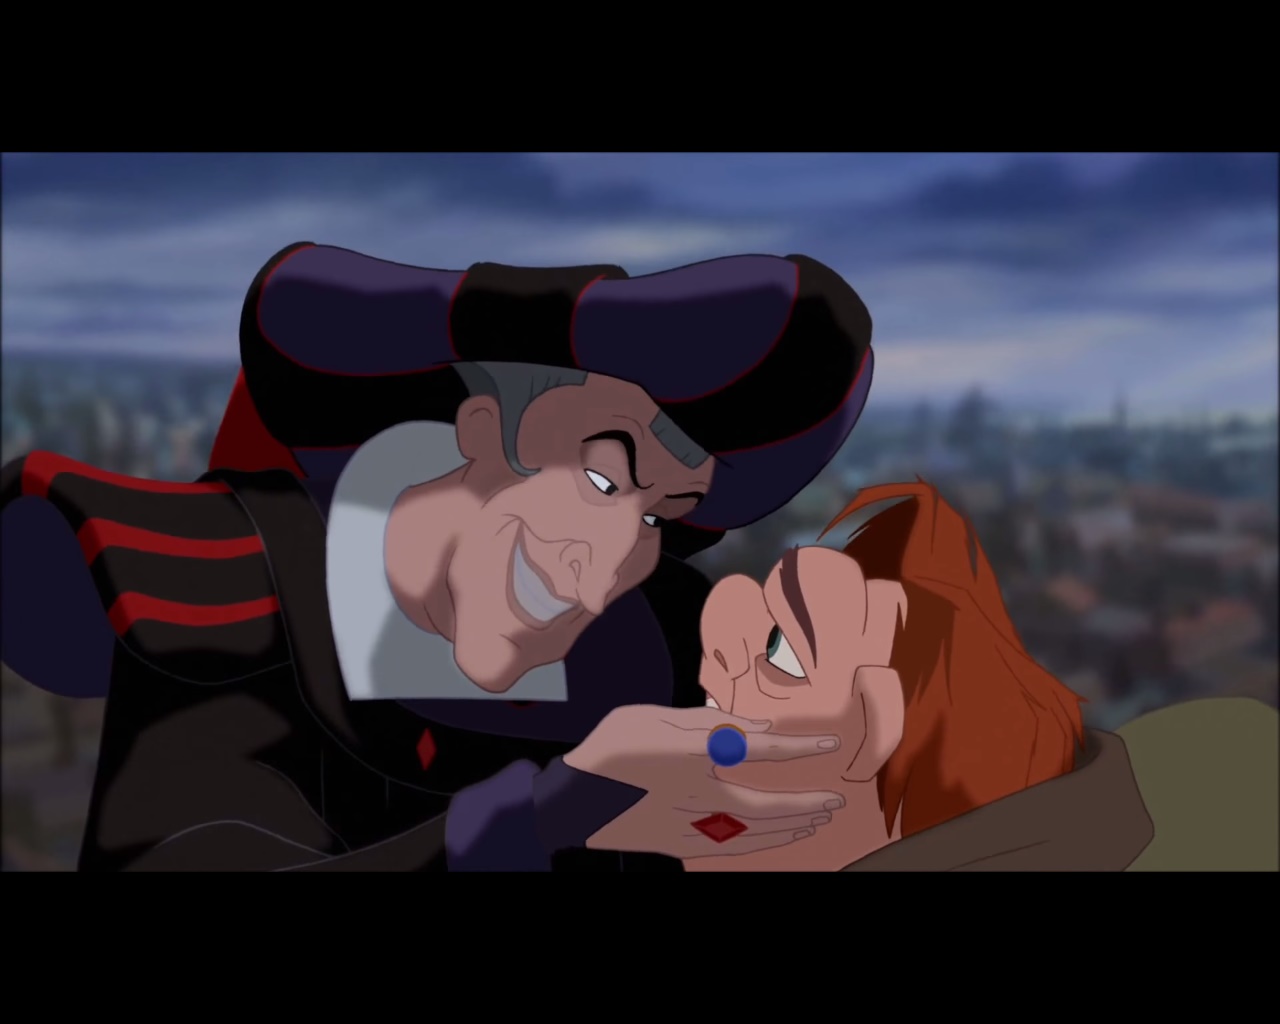 Image Out There Frollo 3 Disney Wiki Fandom Powered By Wikia